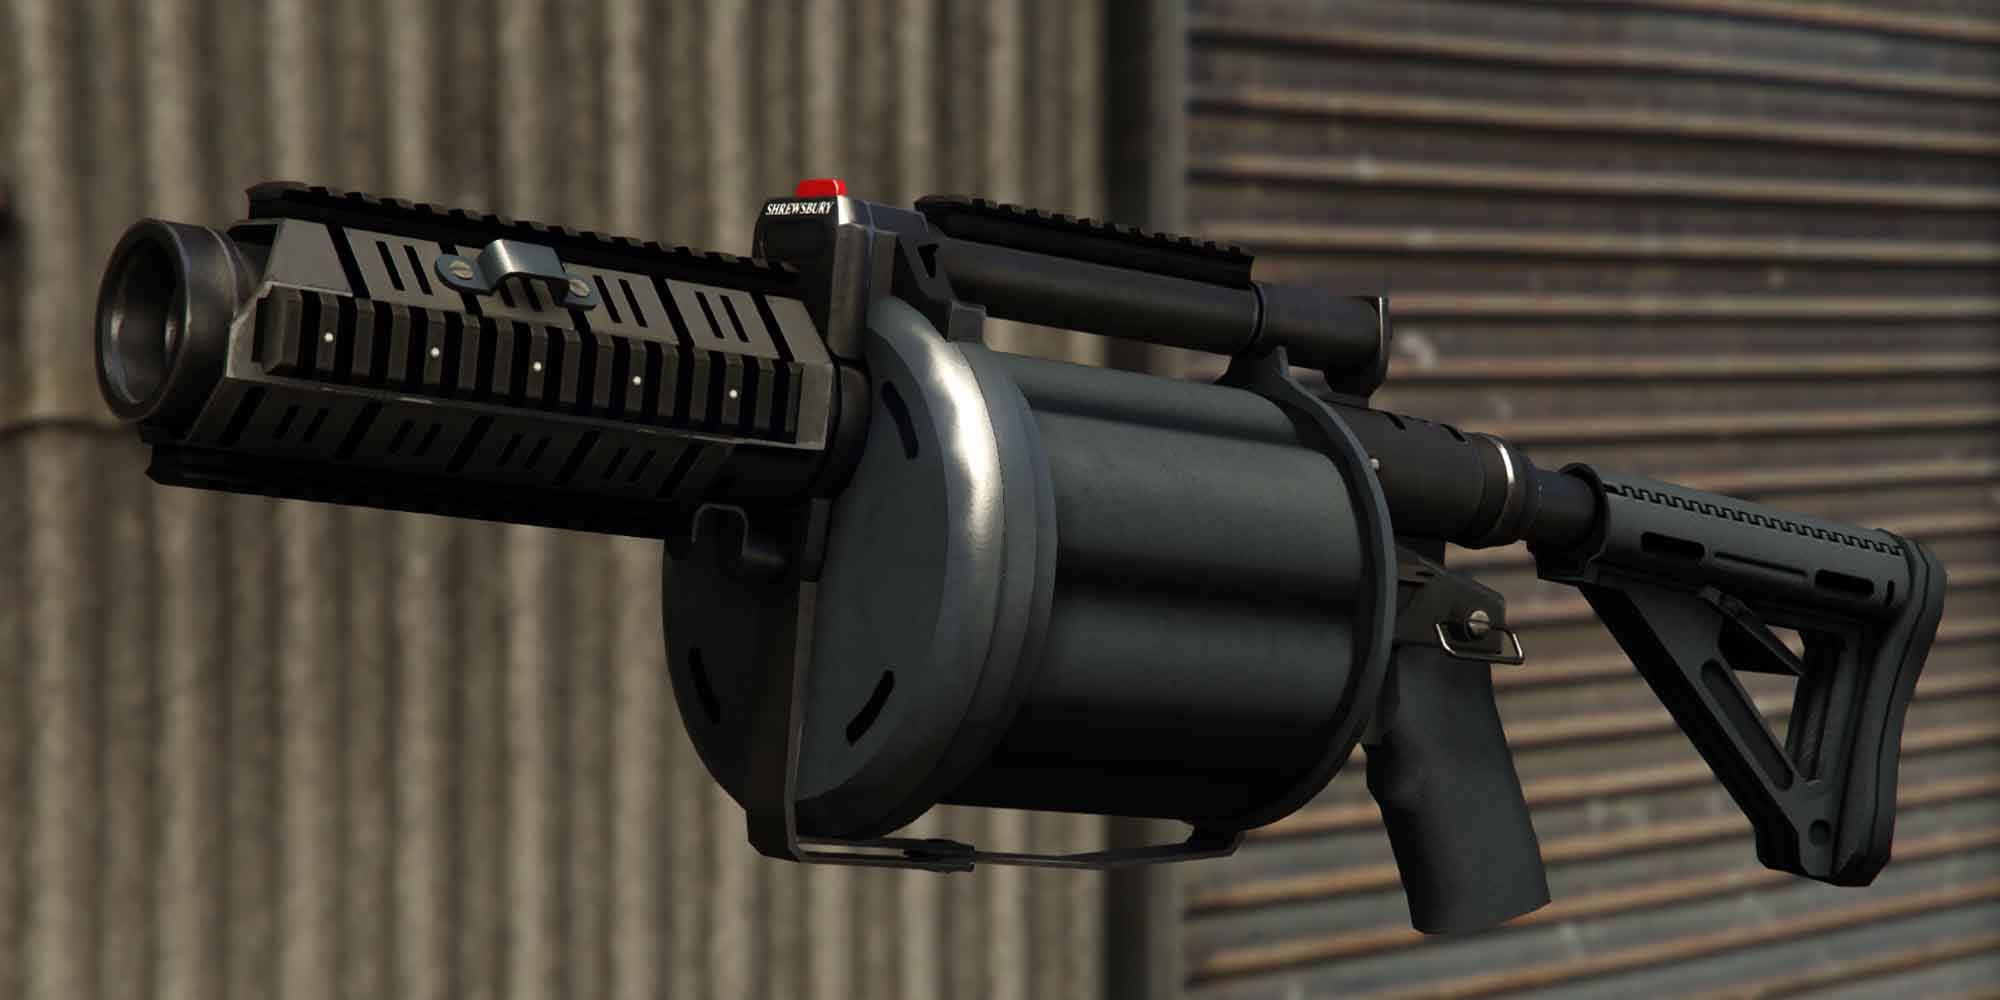 The Grenade Launcher in GTA 5 can fire multiple times before being reloaded